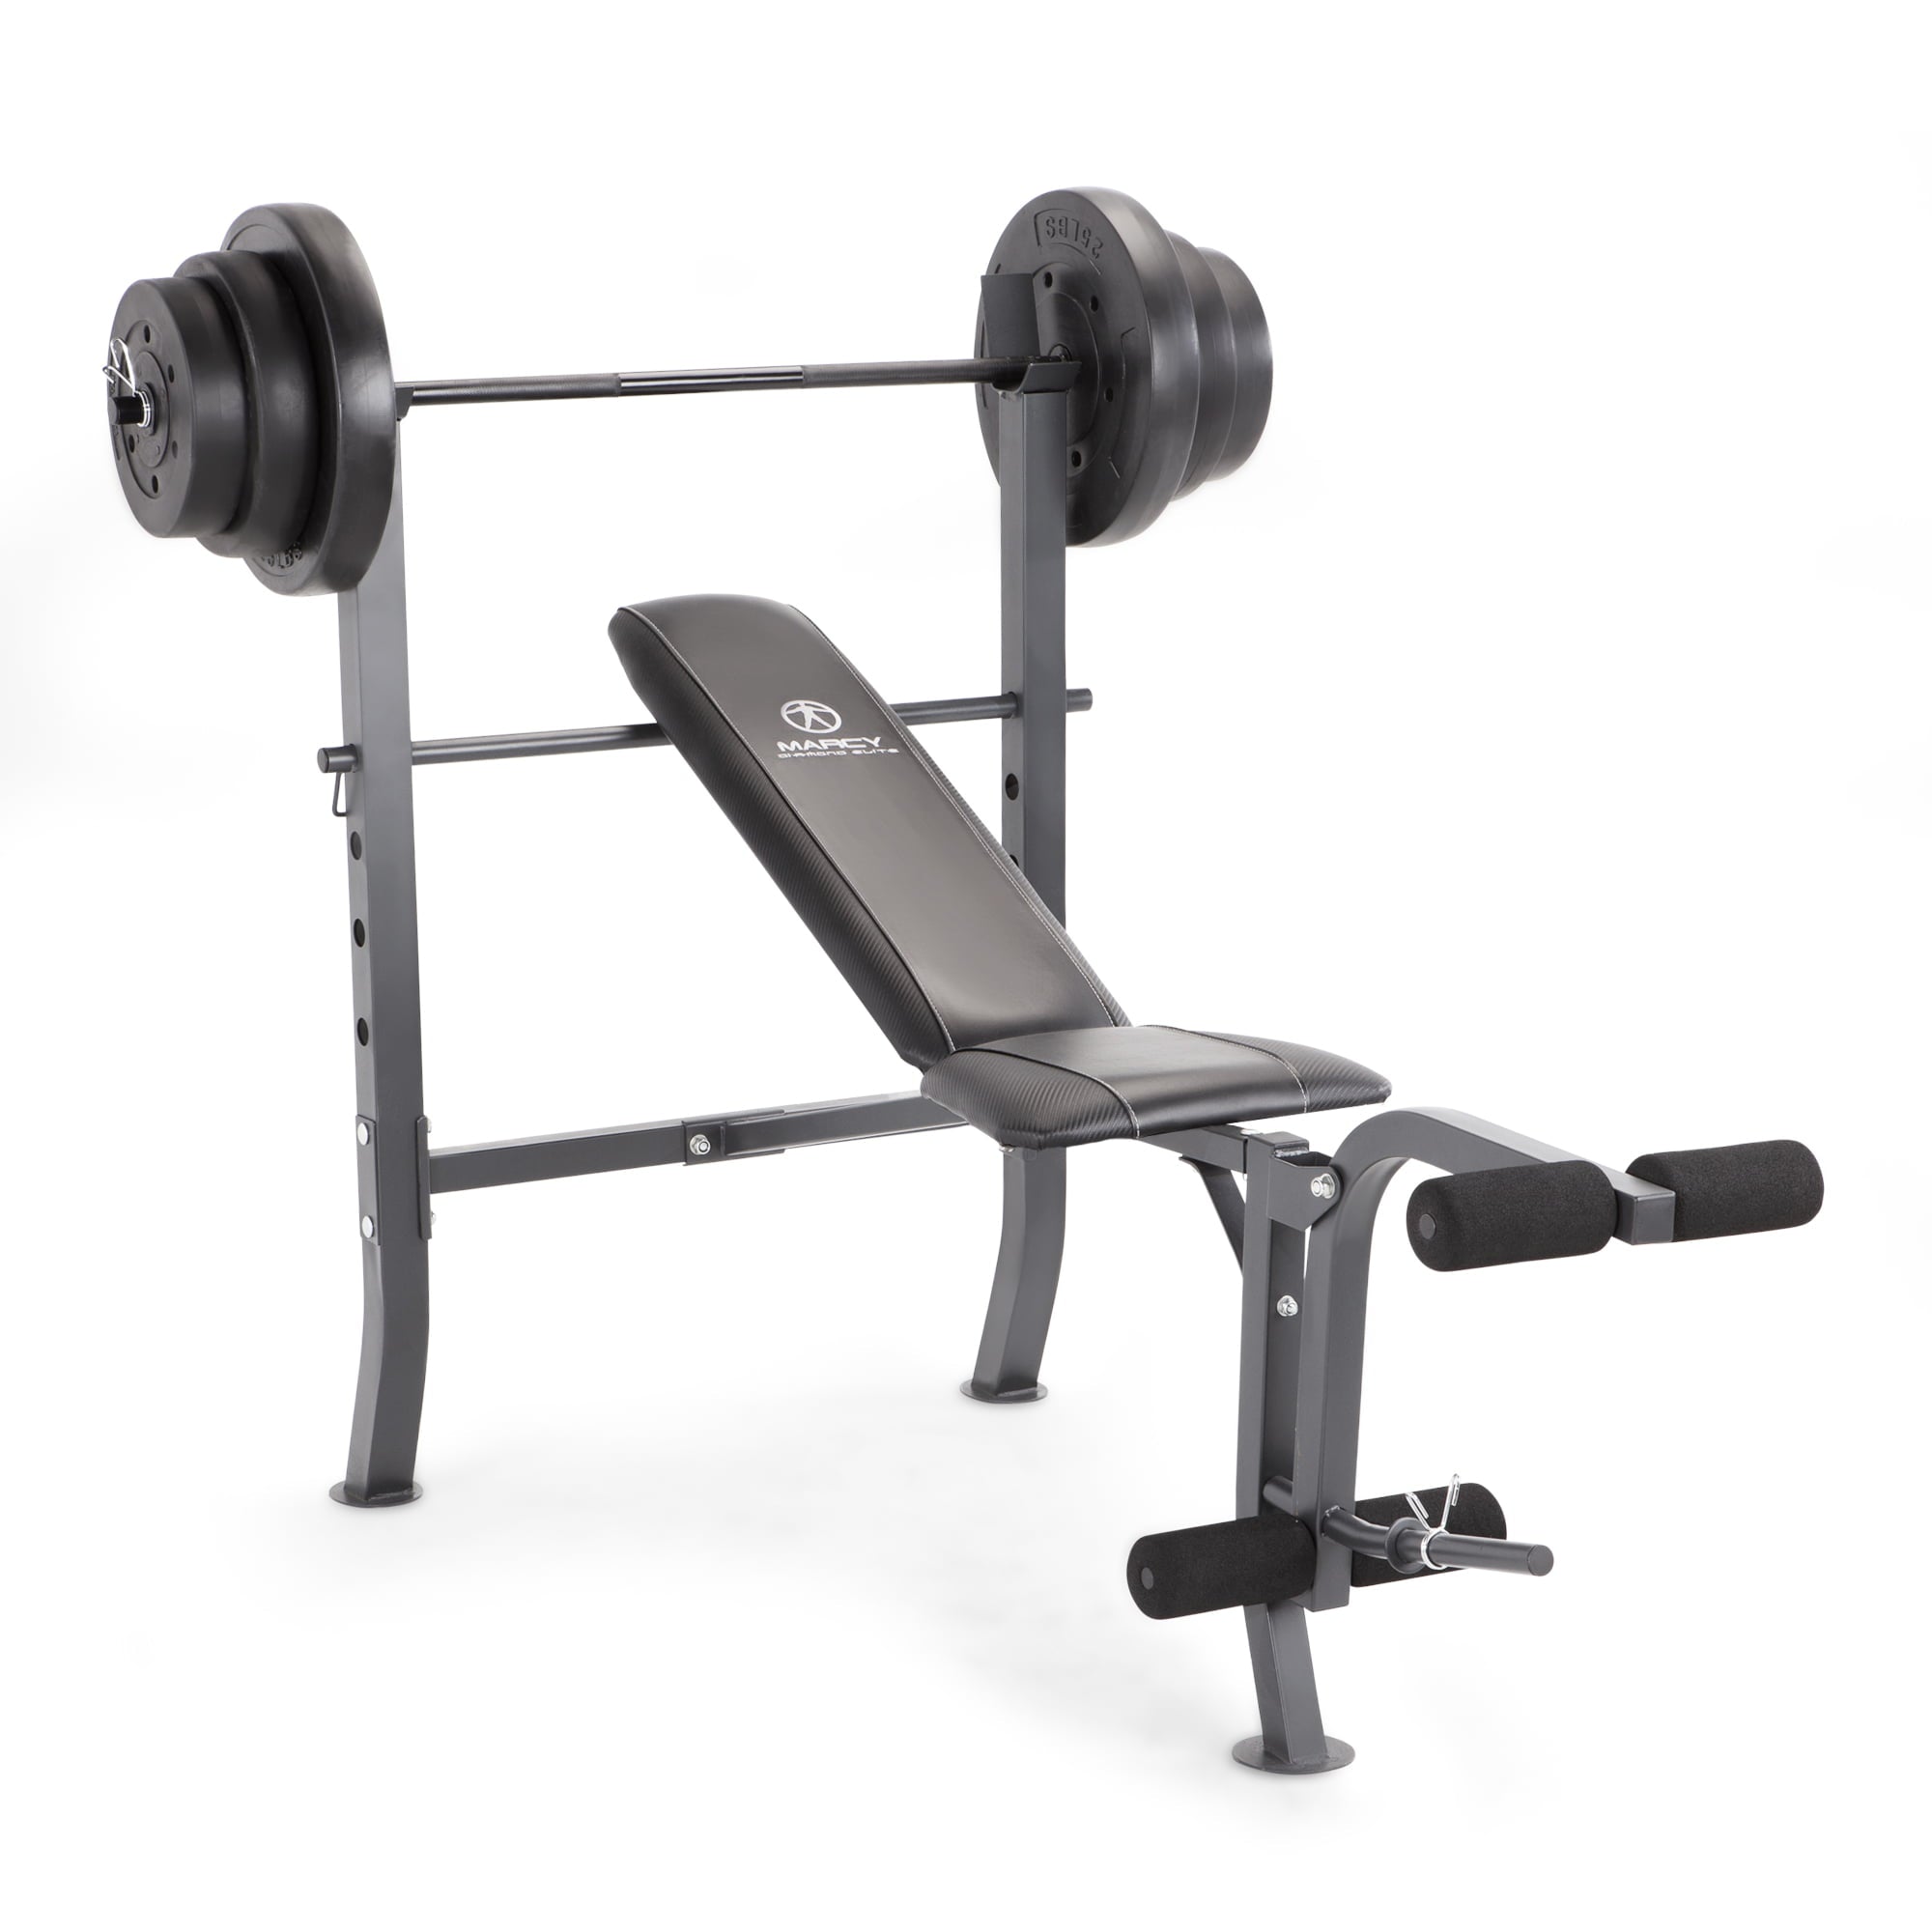 Standard Bench with 100 Lb. Weight Set Home Gym Workout Equipment